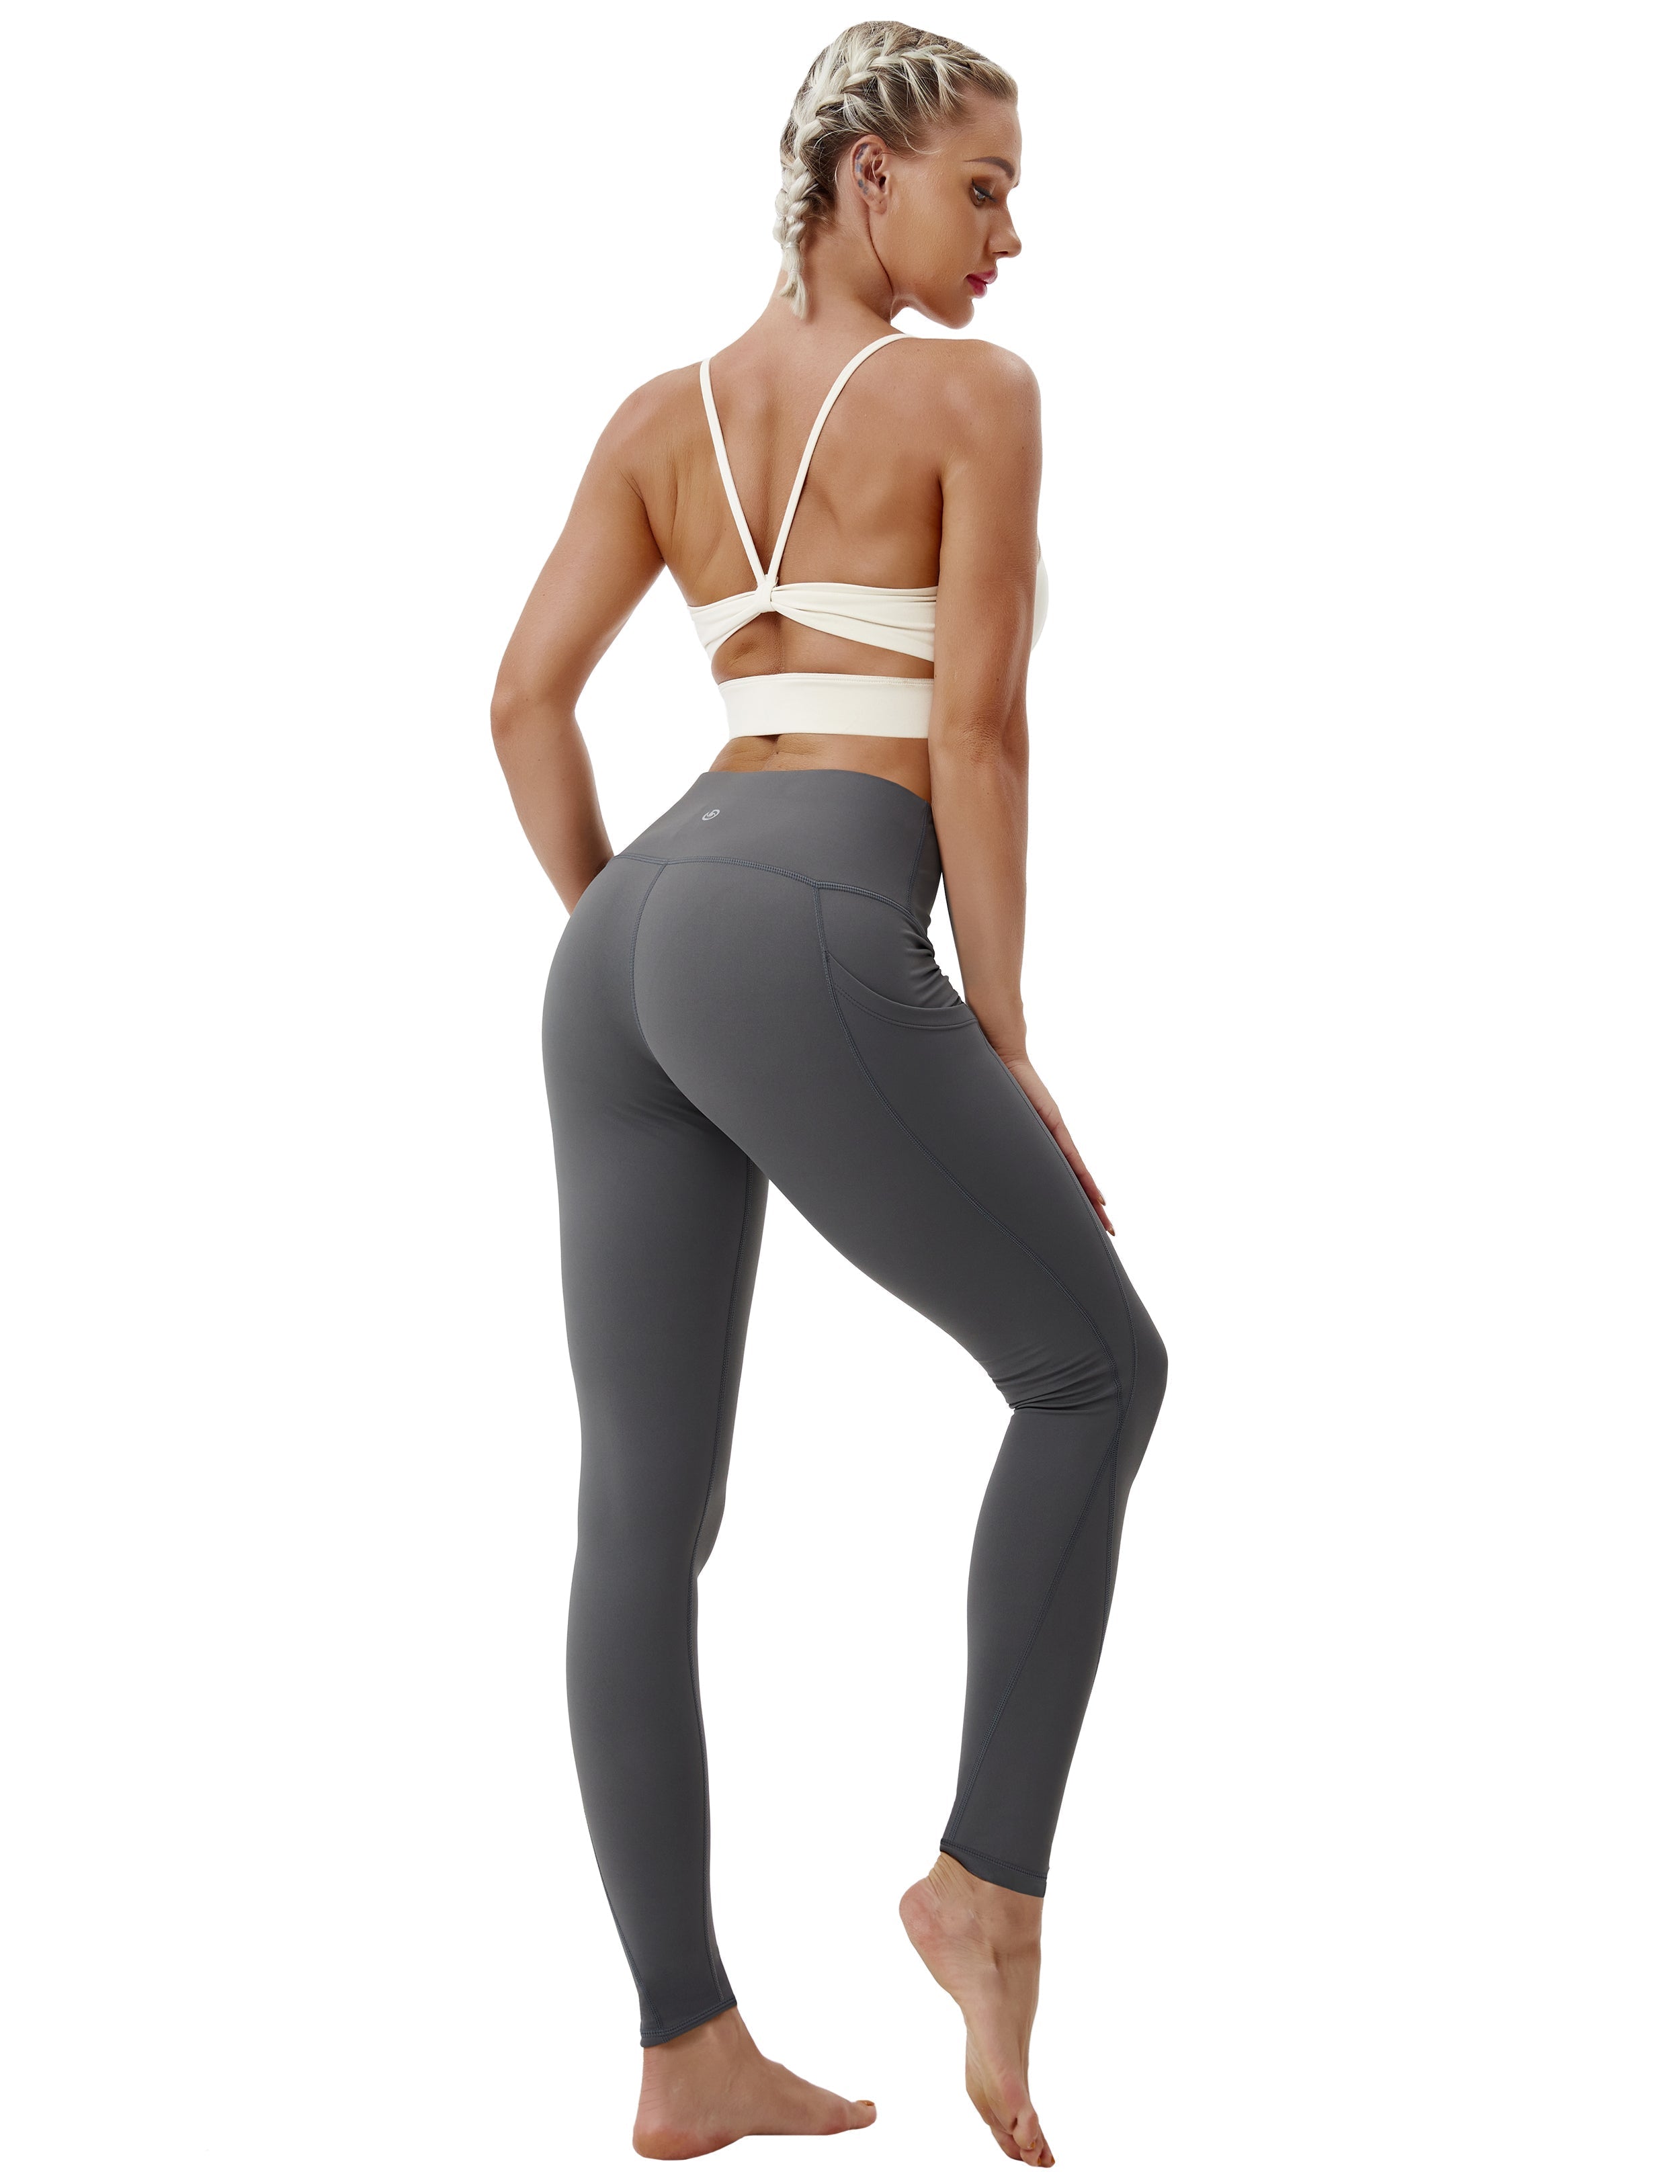 High Waist Side Pockets Yoga Pants shadowcharcoal 75% Nylon, 25% Spandex Fabric doesn't attract lint easily 4-way stretch No see-through Moisture-wicking Tummy control Inner pocket